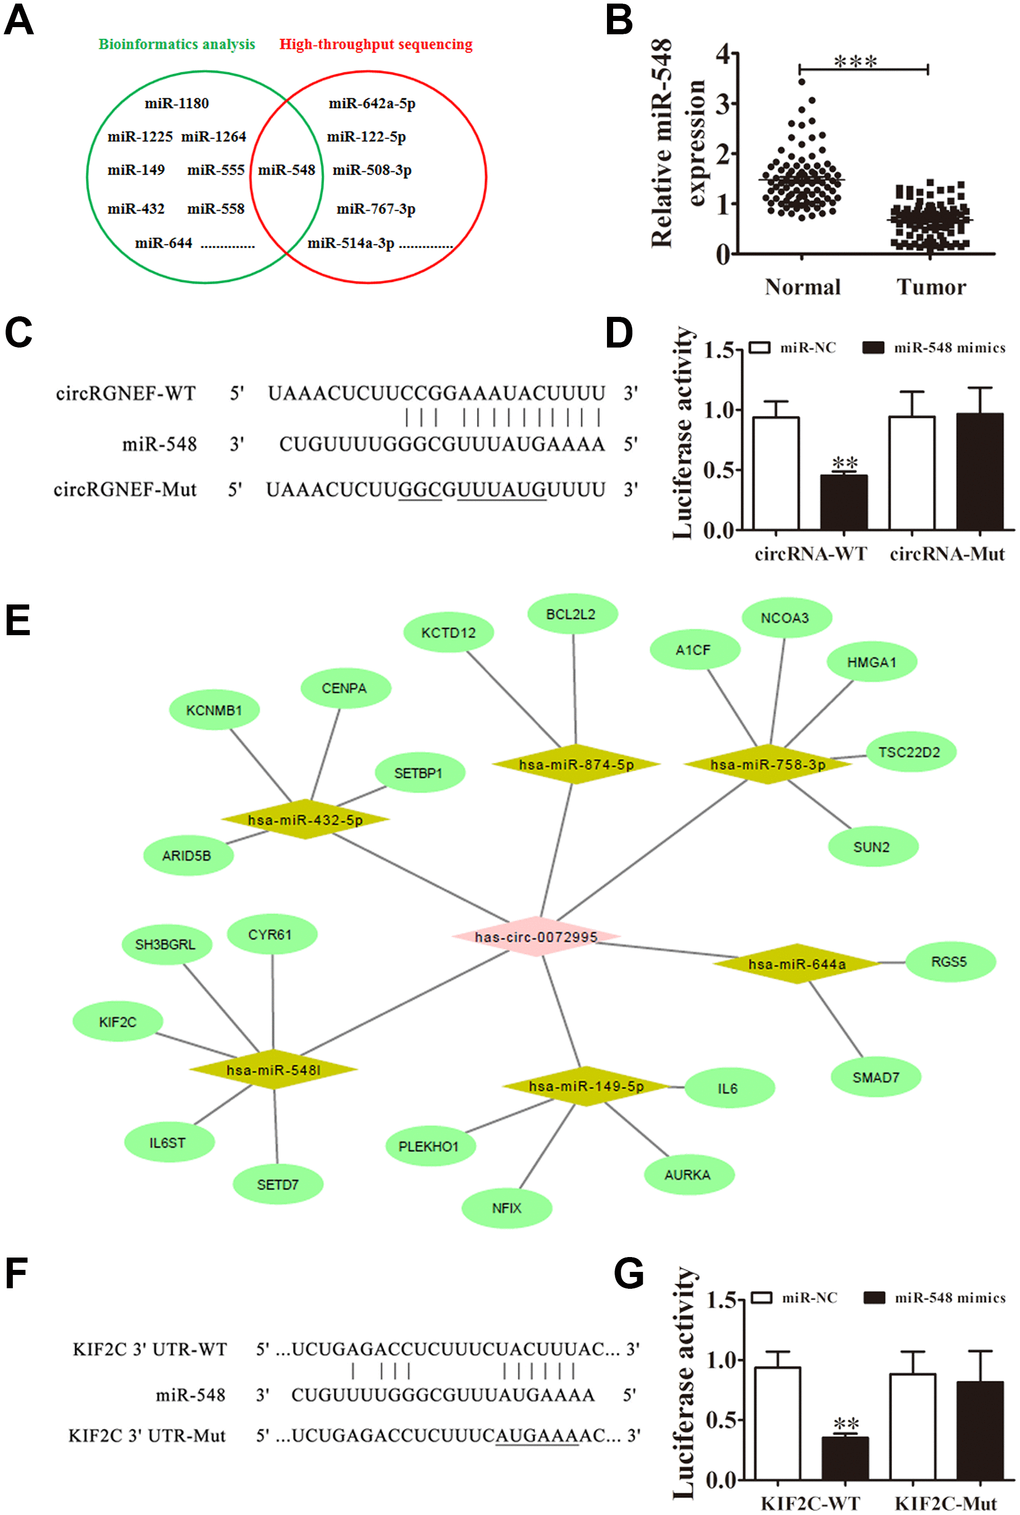 miR-548 and KIF2C are downstream targets of circRGNEF. (A) Bioinformatics analysis (https://circinteractome.nia.nih.gov/bin/mirnasearch) and high-throughput sequencing indicated miR-548 is a target of circRGNEF. (B) RT-qPCR assay of miR-548 in 90 paired BC tumor and adjacent non-tumor tissues. Data are means ± SD. ***P C) The mutated (Mut) version of circRGNEF is shown. (D) The relative luciferase activity was determined 48 h after transfection of HEK293T cells with miR-548 mimic/normal control (NC) or circRGNEF wild-type/Mut. Data are presented as the mean ± SD. ***P E) Bioinformatics analysis (http://circnet.mbc.nctu.edu.tw/ and http://www.targetscan.org/vert